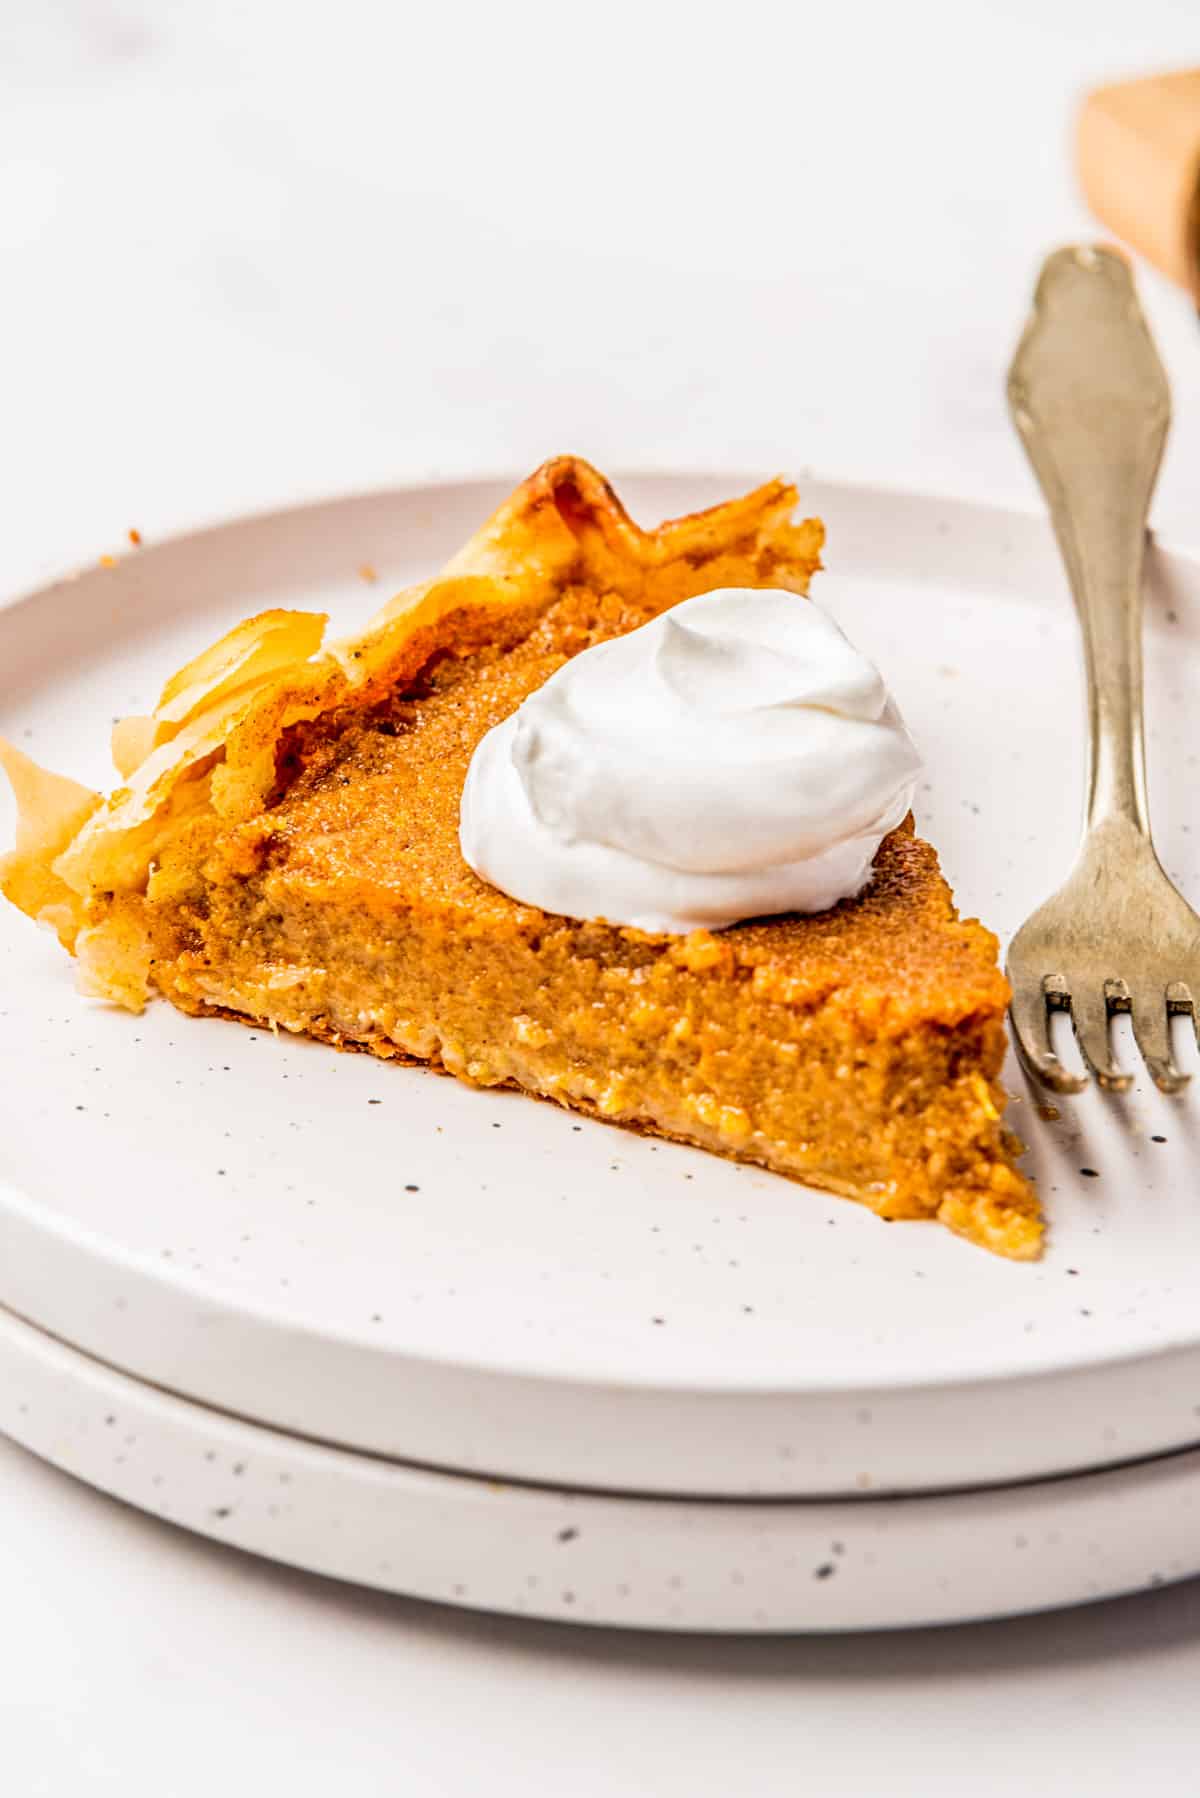 A slice of sweet potato pie on a white plate with a fork.